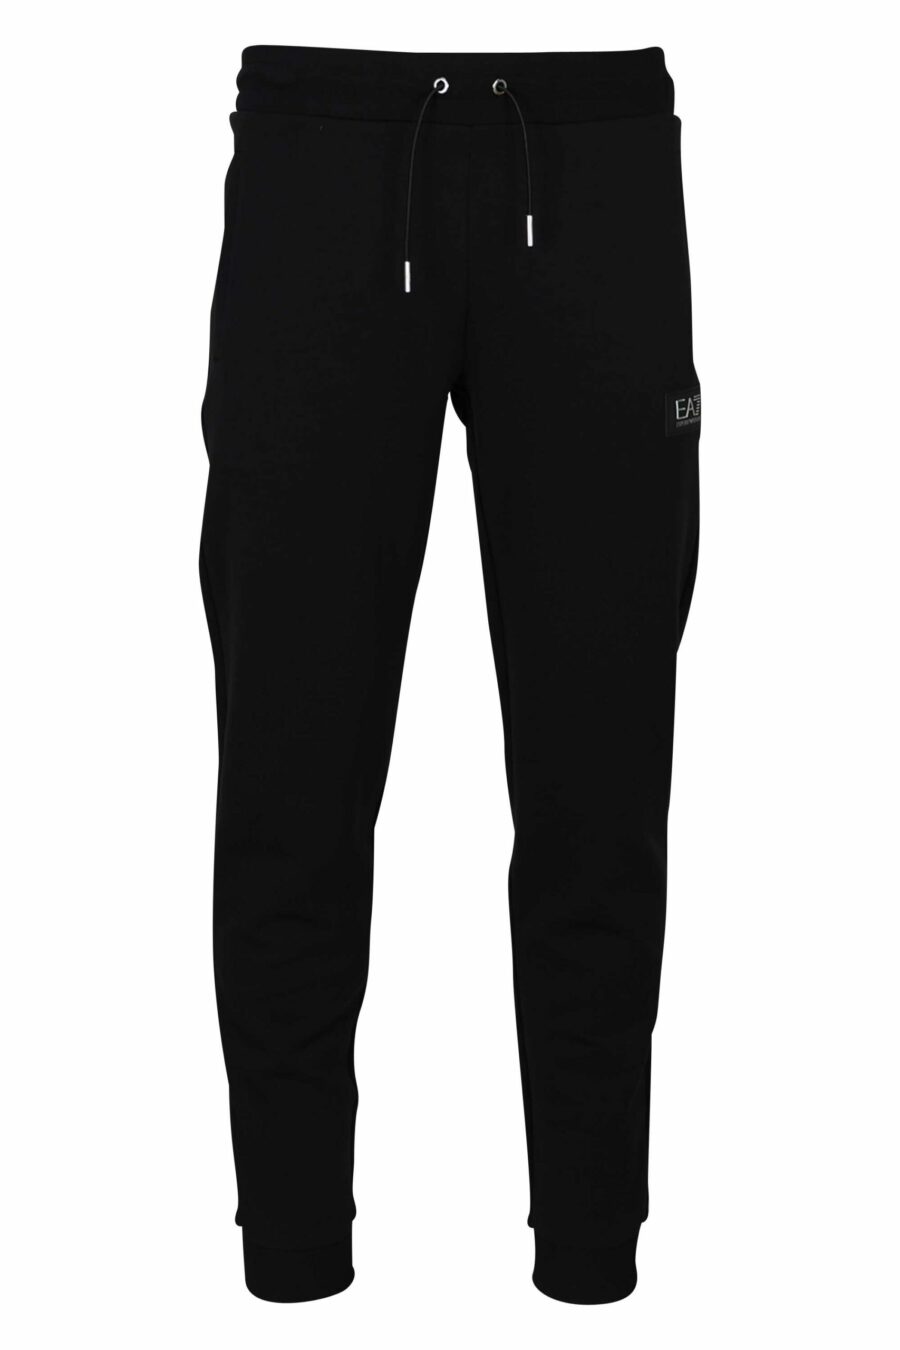 Tracksuit bottoms black with white "lux identity" minilogue on black badge - 8057970666158 scaled